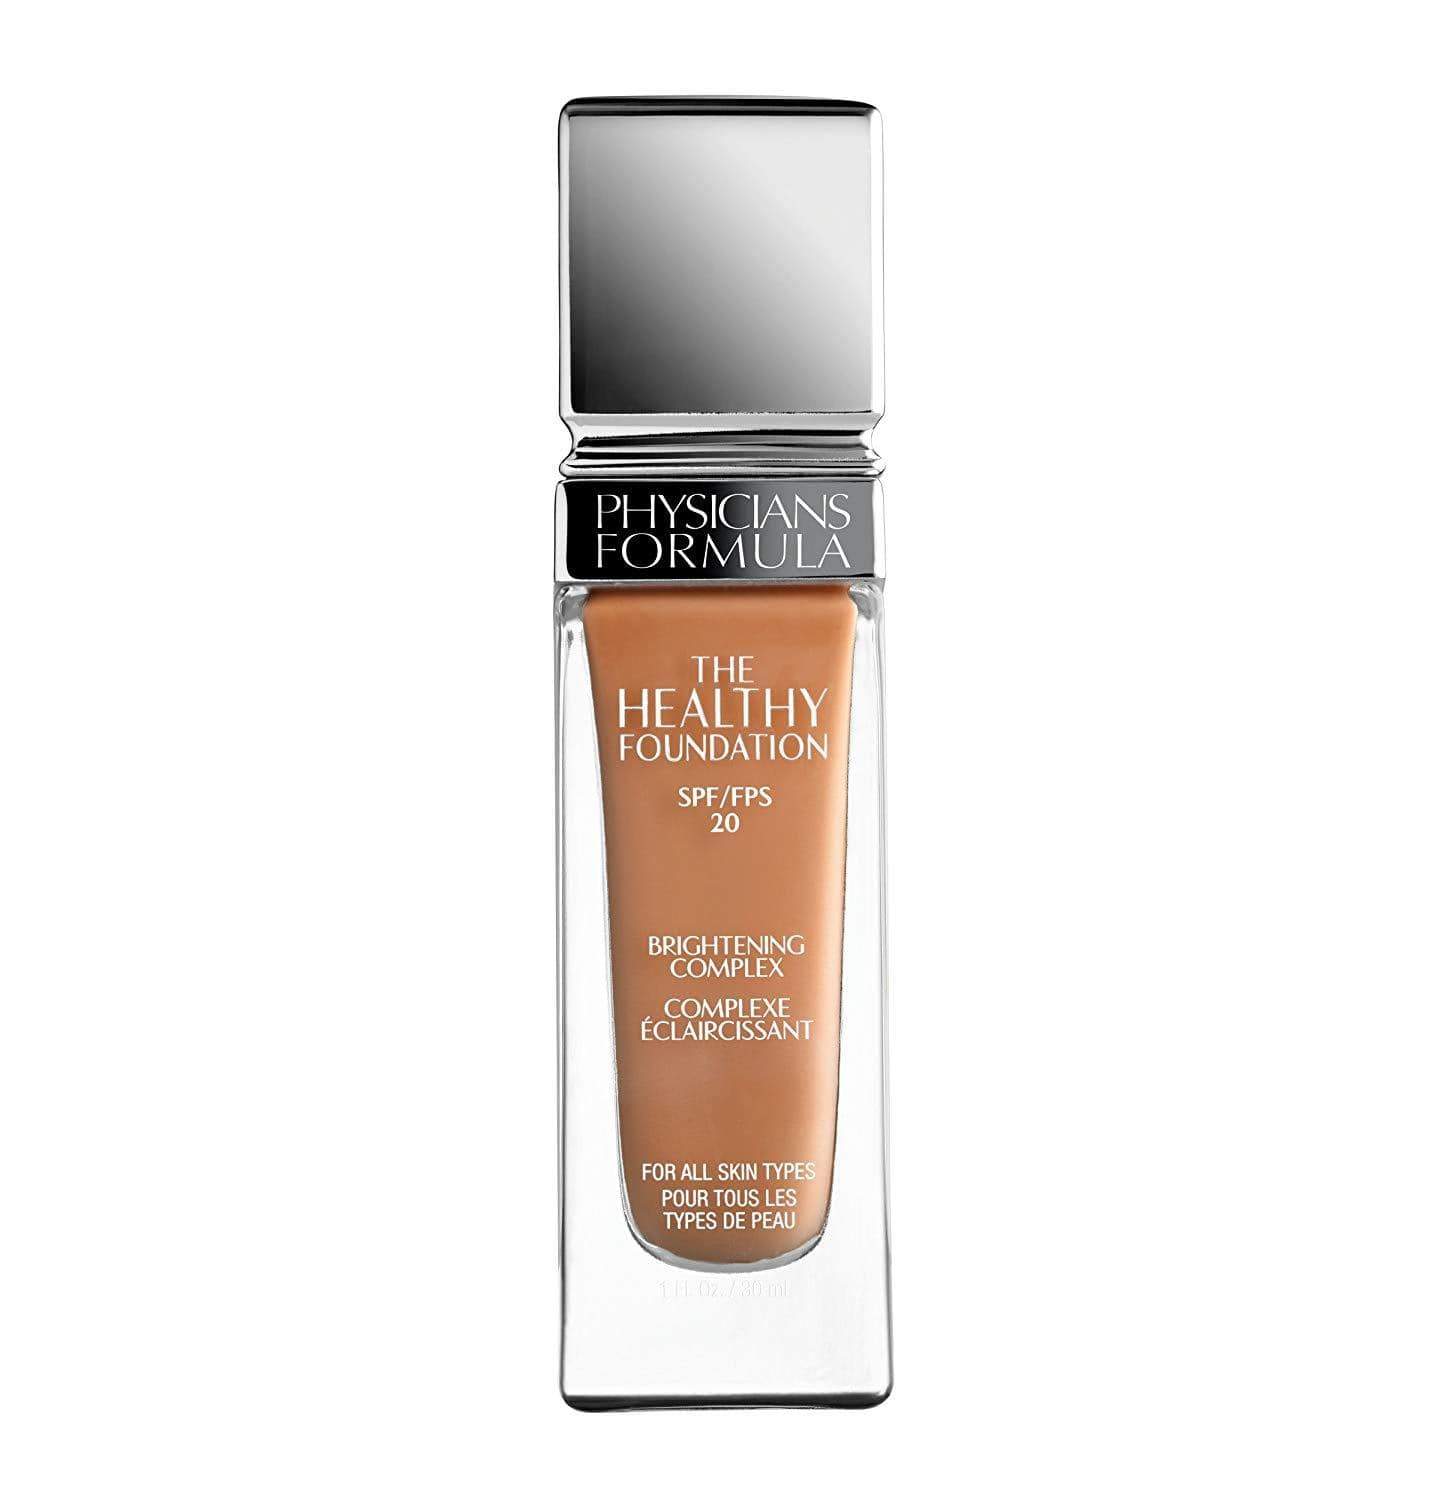 PHYSICIANS FORMULA The Healthy Foundation with SPF 20 - DC1, foundation, London Loves Beauty